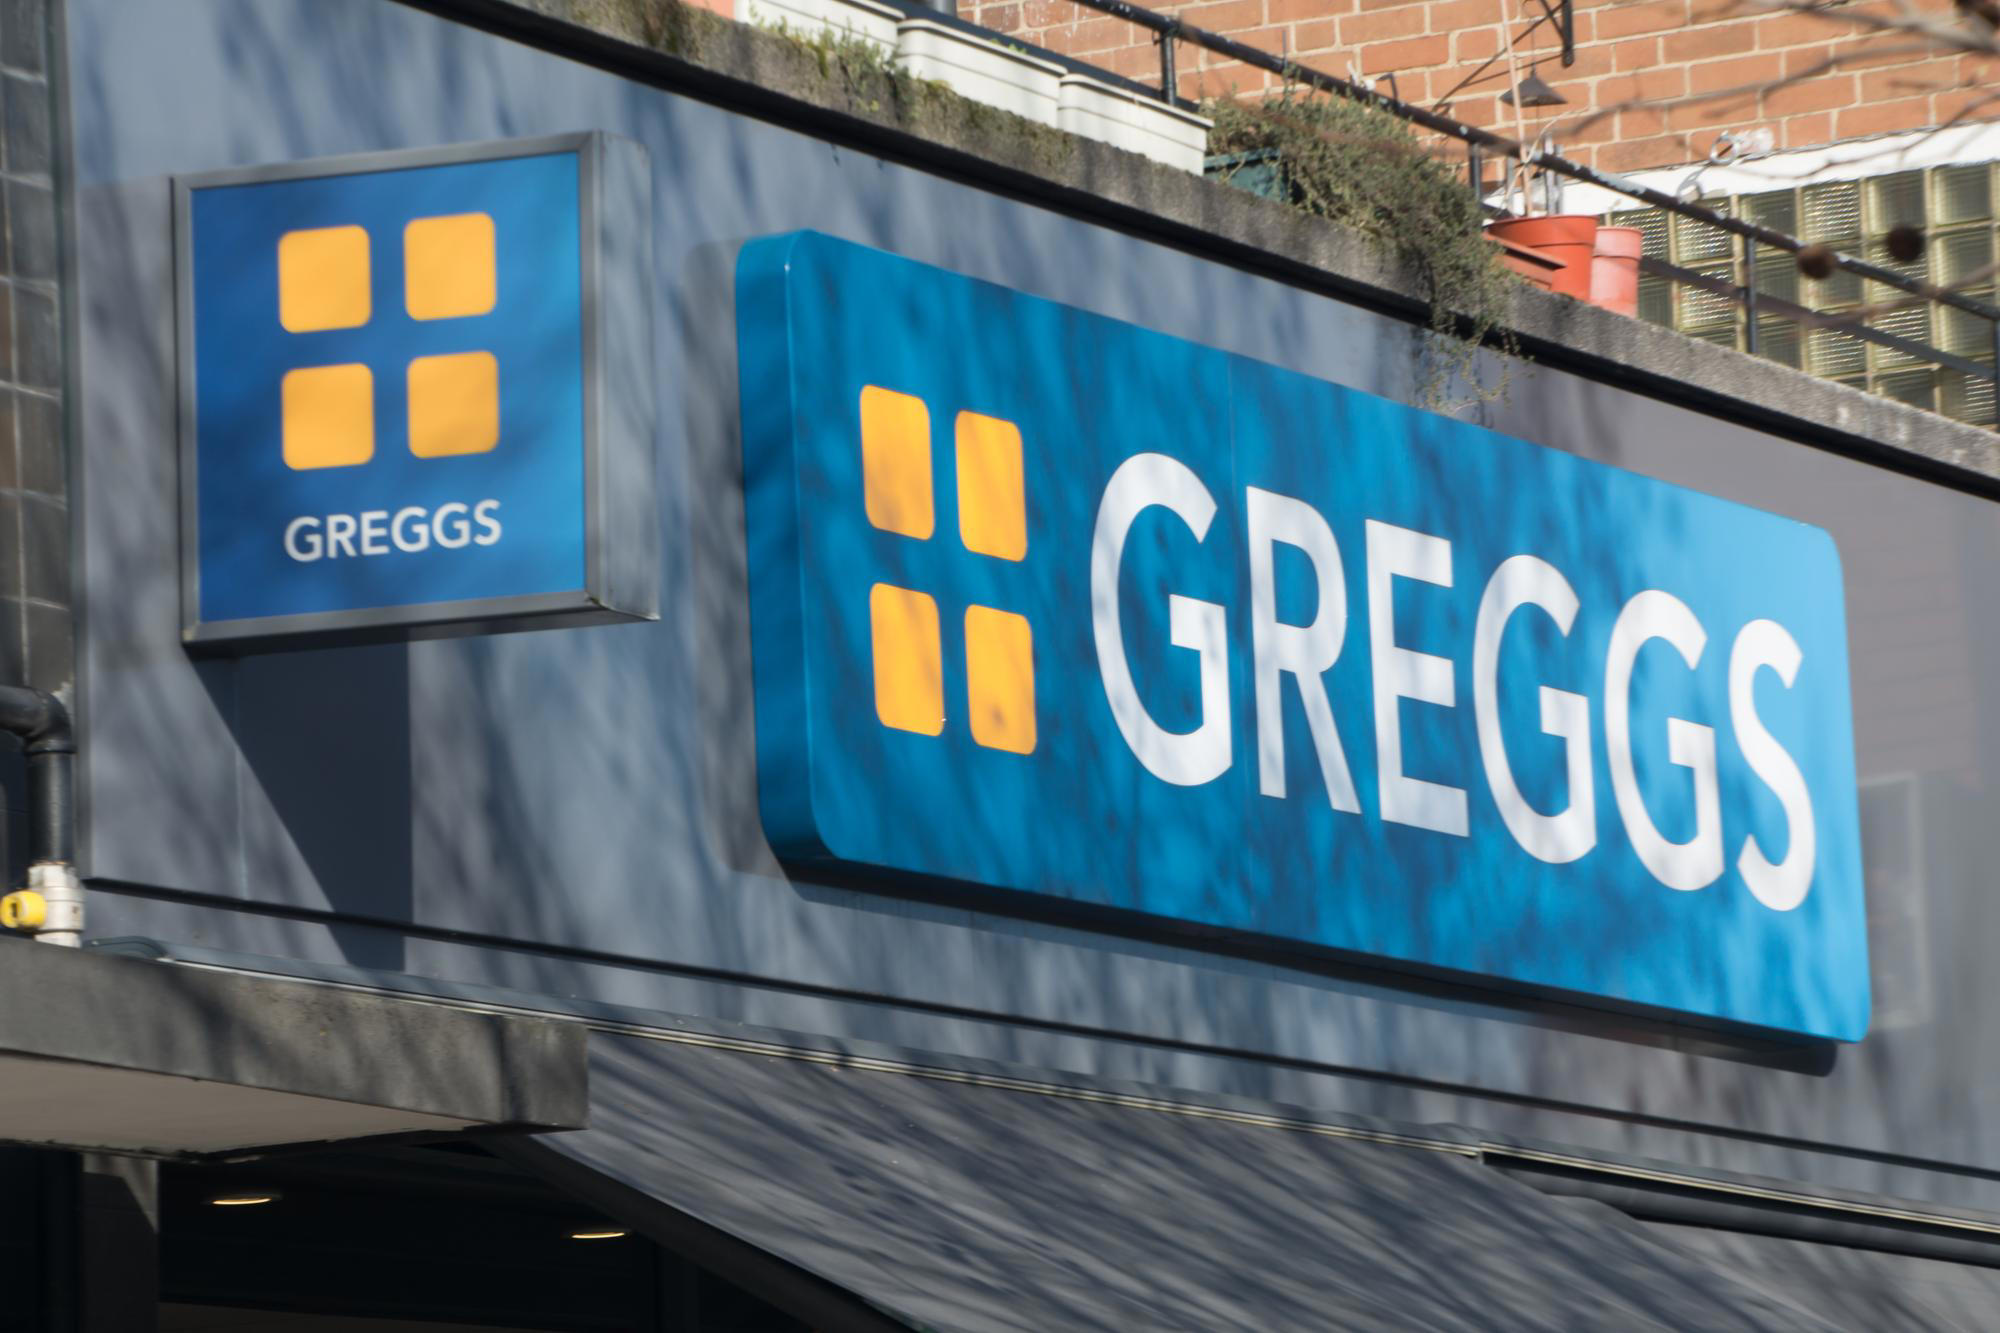 Opening date revealed for new Greggs outlet in Peterborough